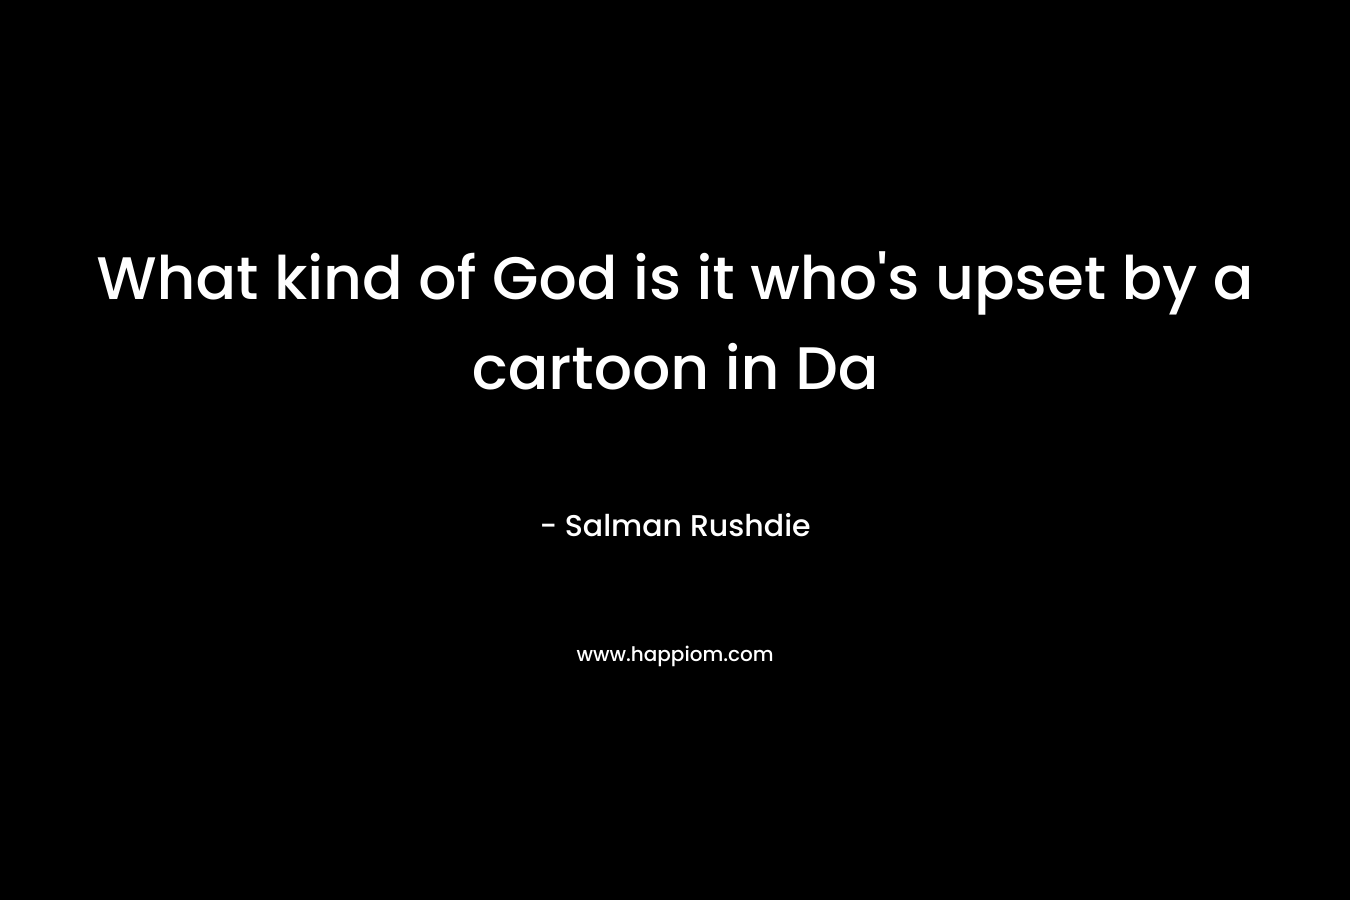 What kind of God is it who’s upset by a cartoon in Da – Salman Rushdie